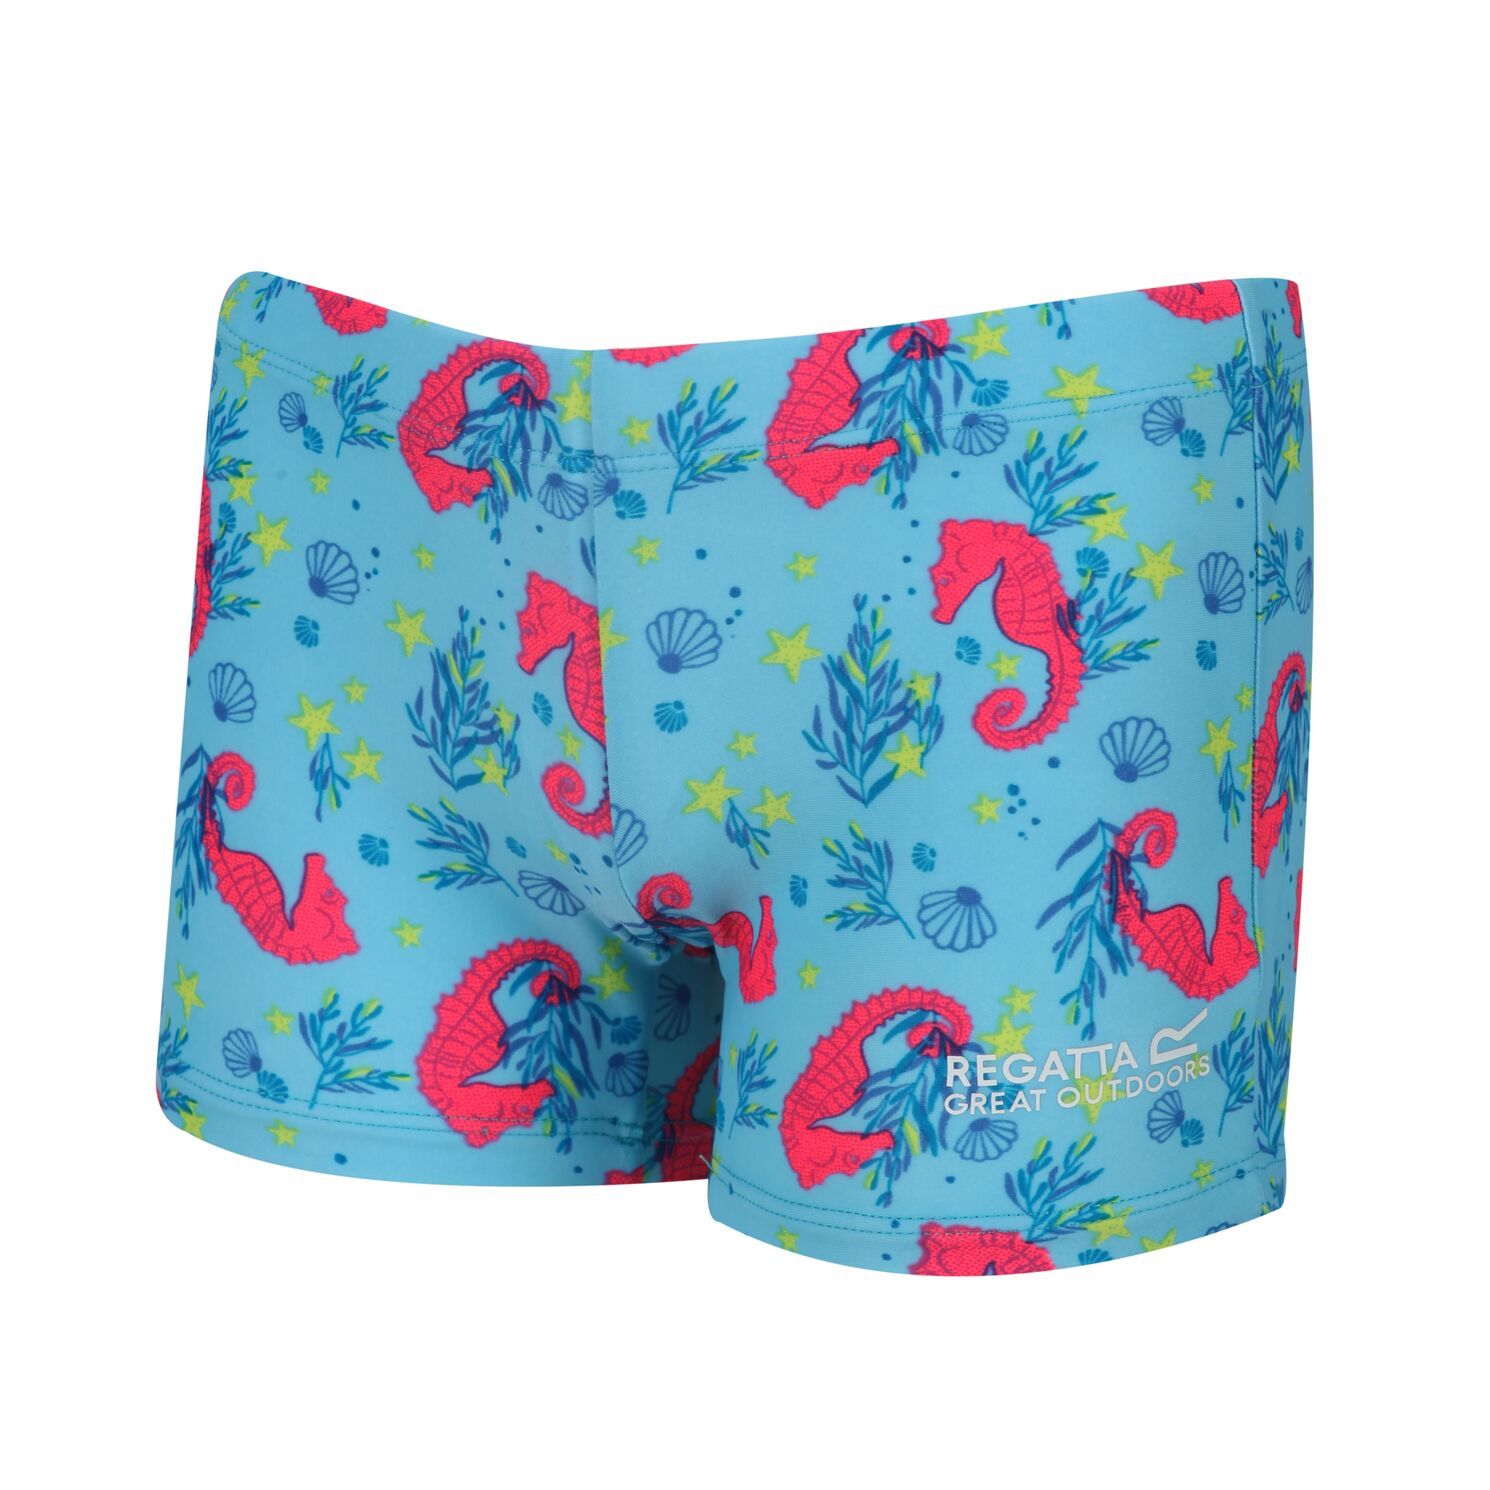 Material: 82% polyamide, 18% elastane. Plain and all over print options. Graphic print. For natural movement and stretch. Zip fastening to centre back neck. Lightweight coverage for the paddling pool or beach adventures. Height sizes to fit: (6-12 Mths): 74-80cm, (12-18 Mths): 80-86cm, (18-24 Mths): 86-92cm, (24-36 Mths): 92-98cm, (36-48 Mths): 98-104cm, (48-60 Mths): 104-110cm, (60-72 Mths): 110-116cm.